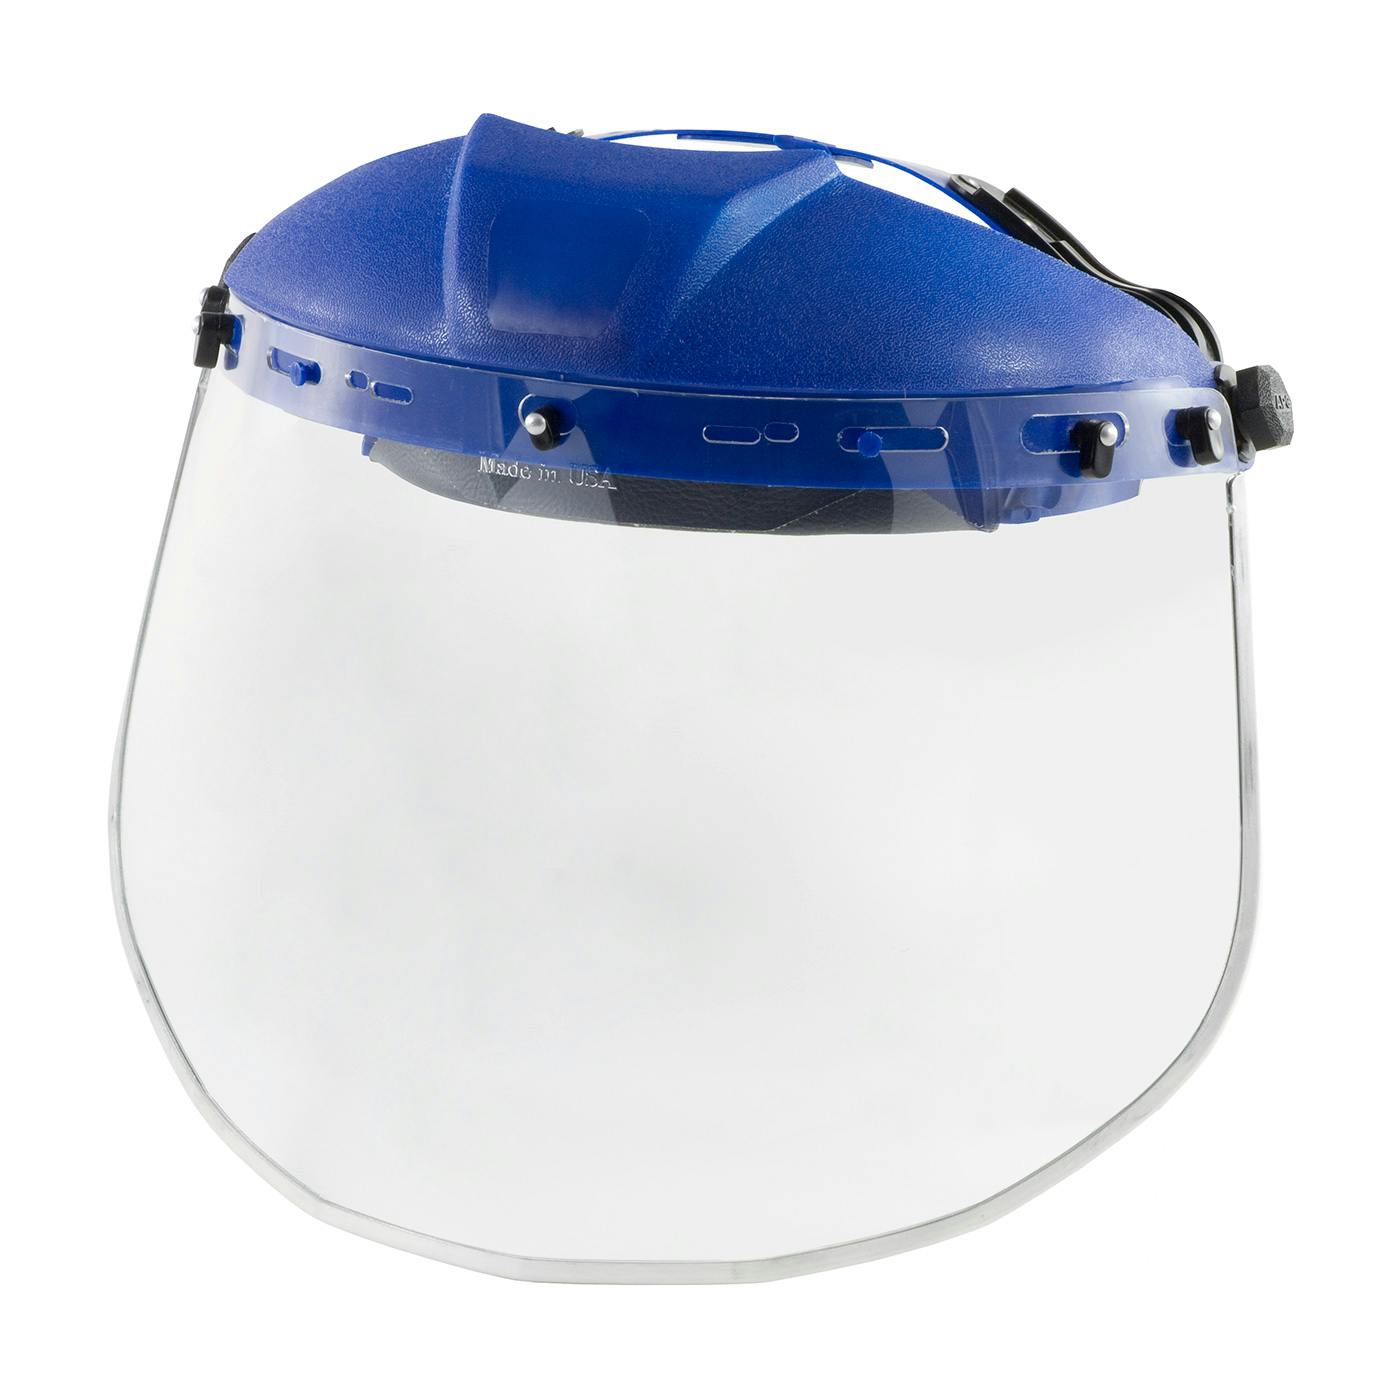 Clear PETG (Polyethylene Terephthalate Glycol) Safety Visor with Aluminum Binding - .040" Thickness, Clear (251-01-7214) - OS_0